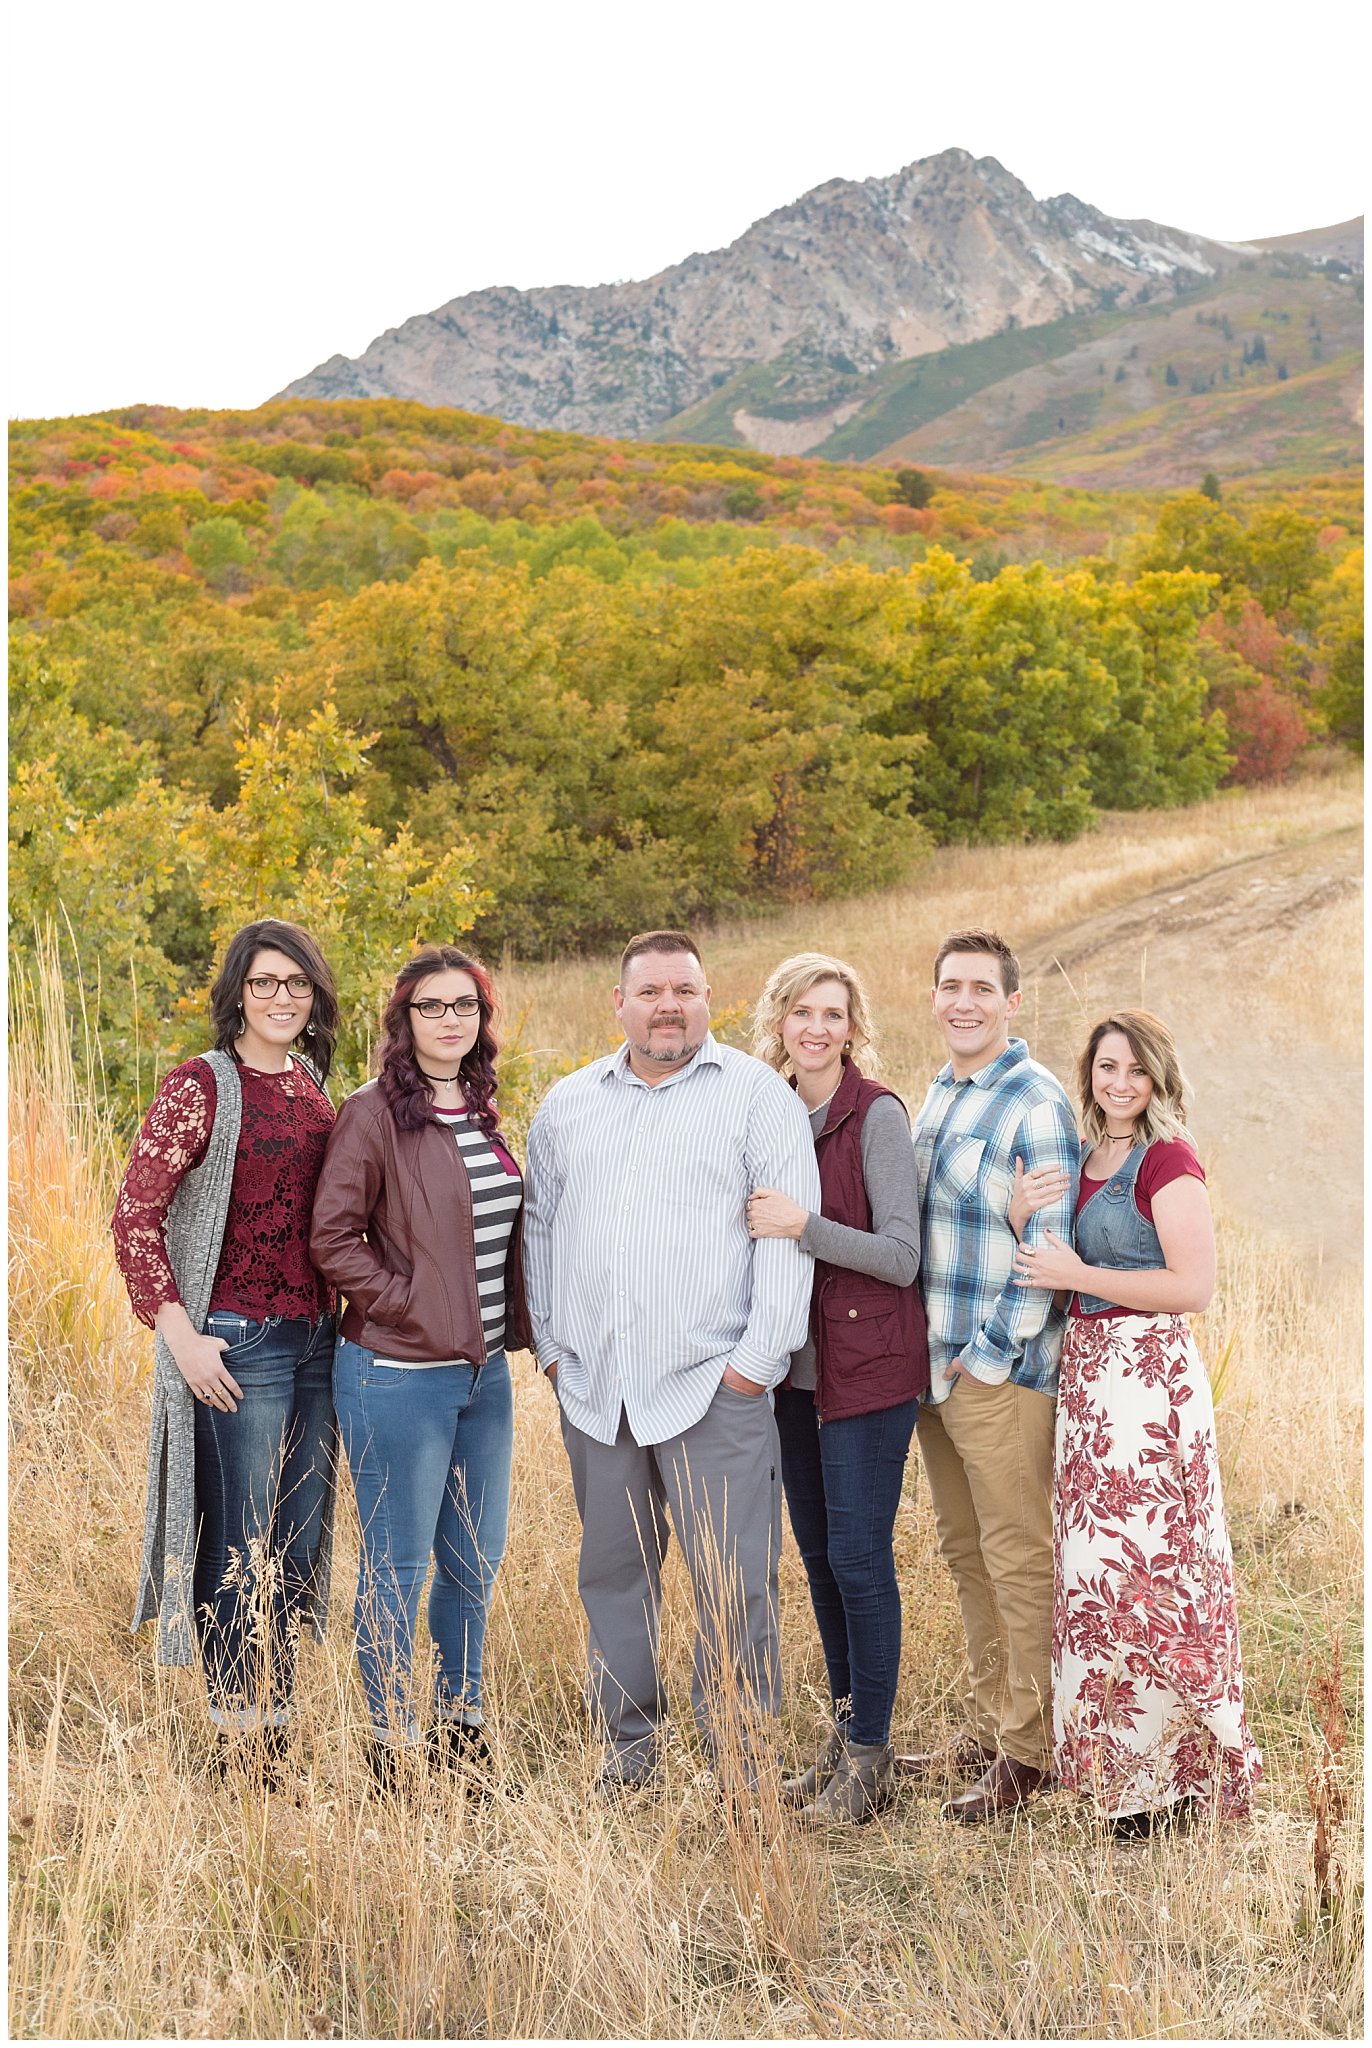 Family at Snow Basin resort in the fall | Utah Family pictures | fall leaves and colors